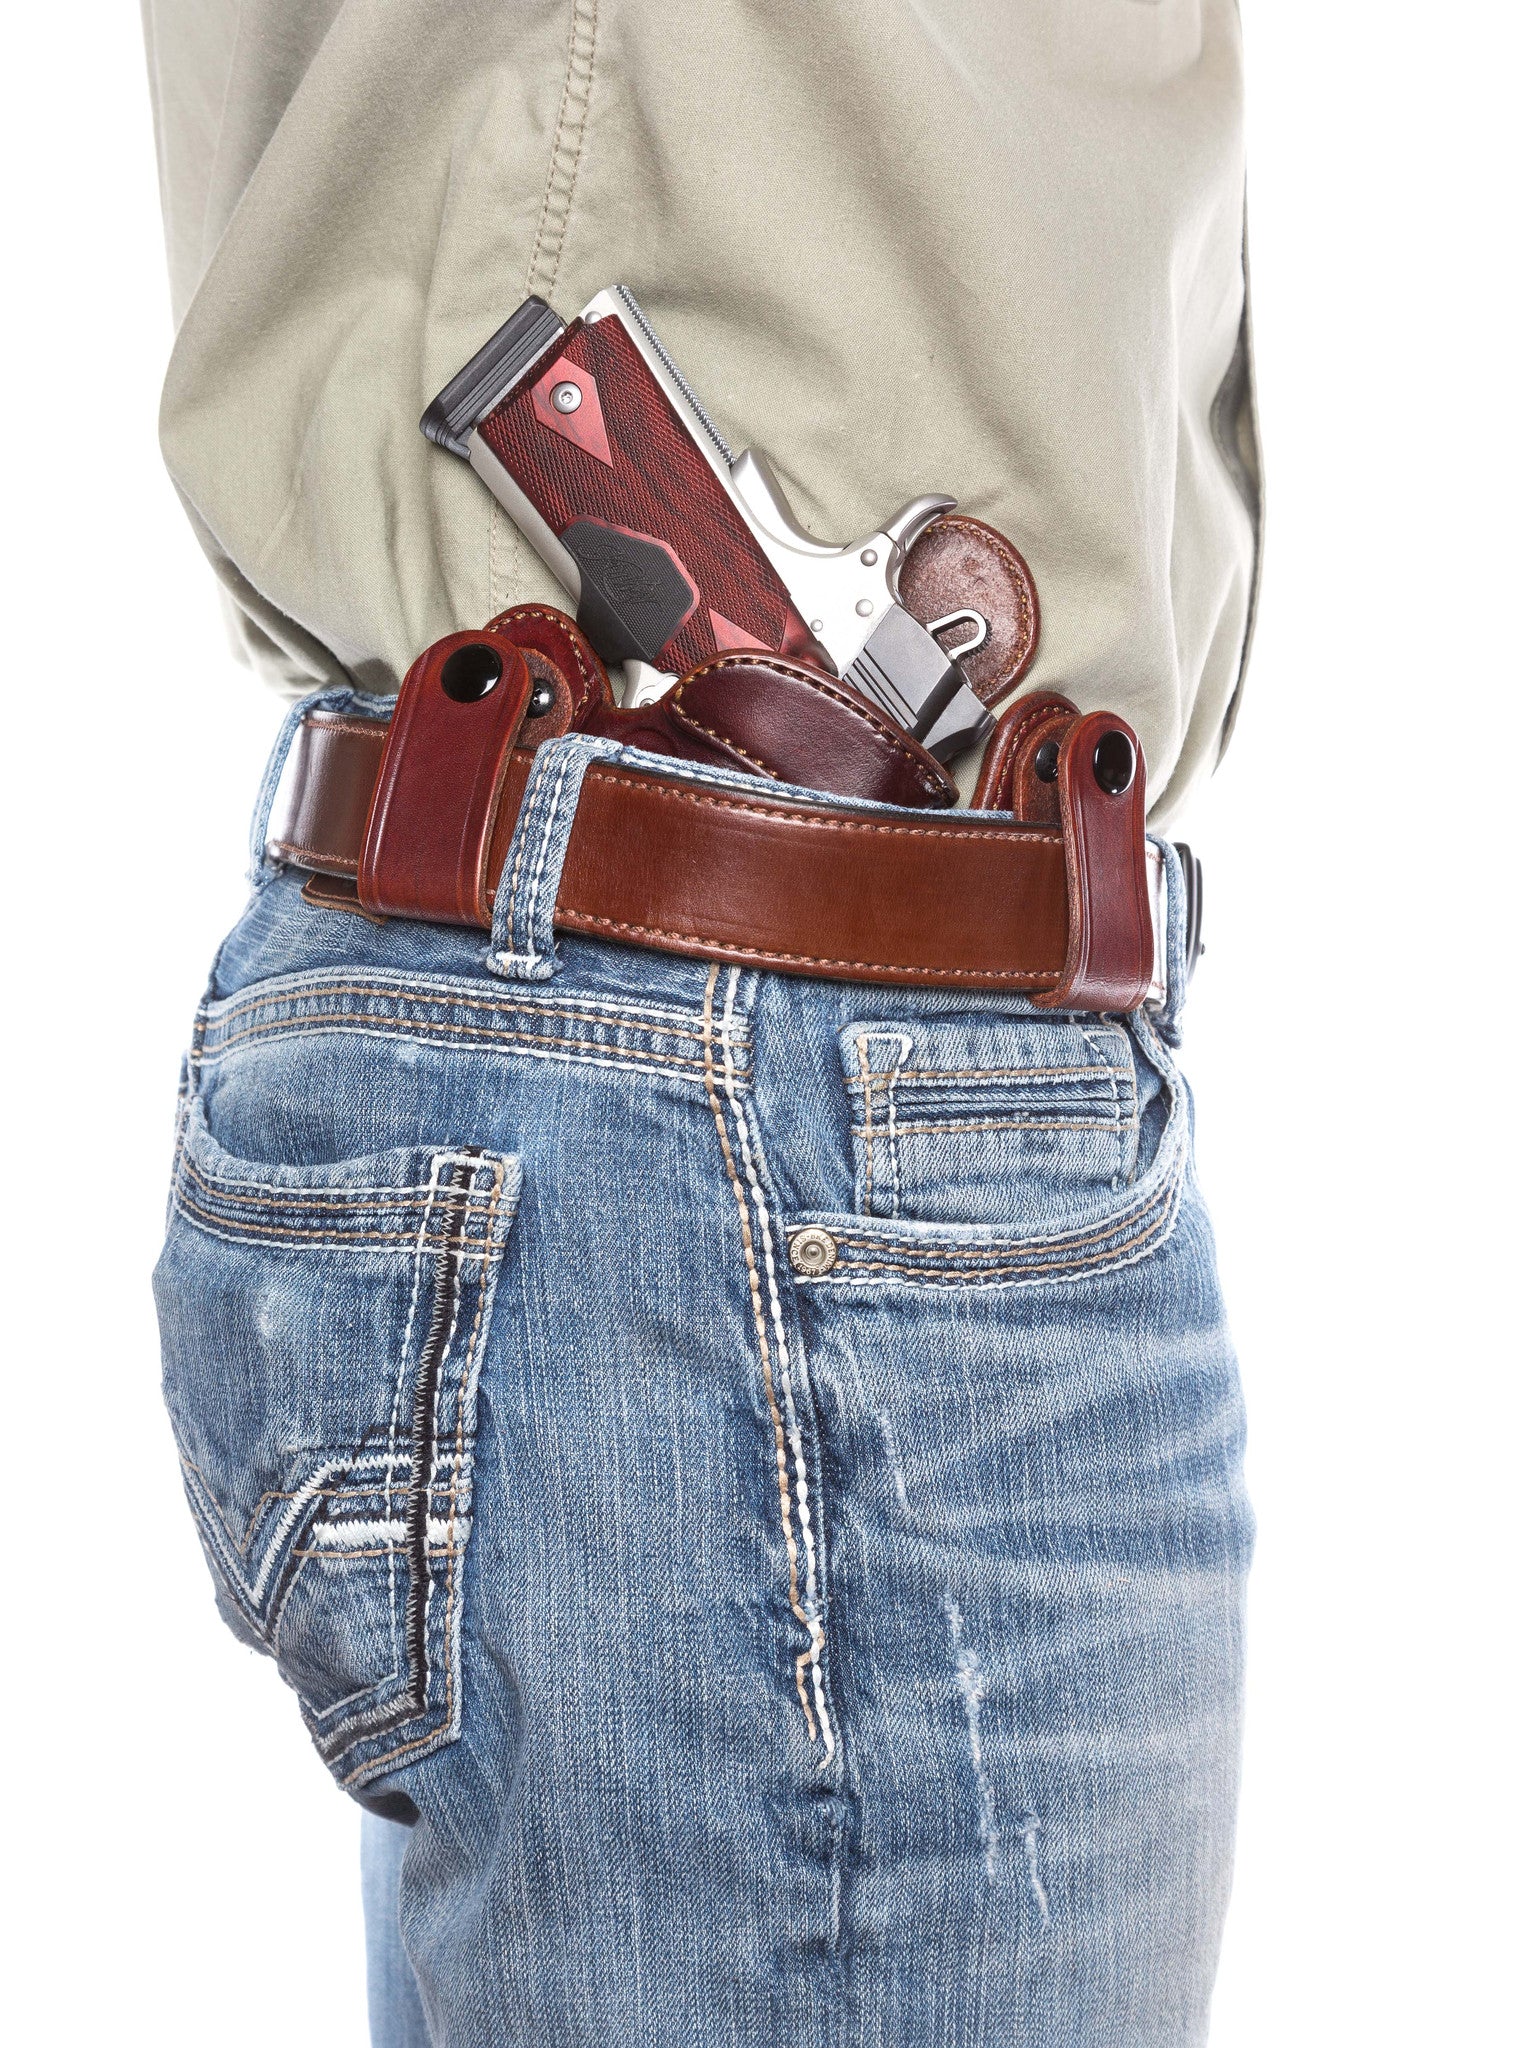 Concealed Carry Holsters: The Ultimate Buyer's Guide [UPDATED]